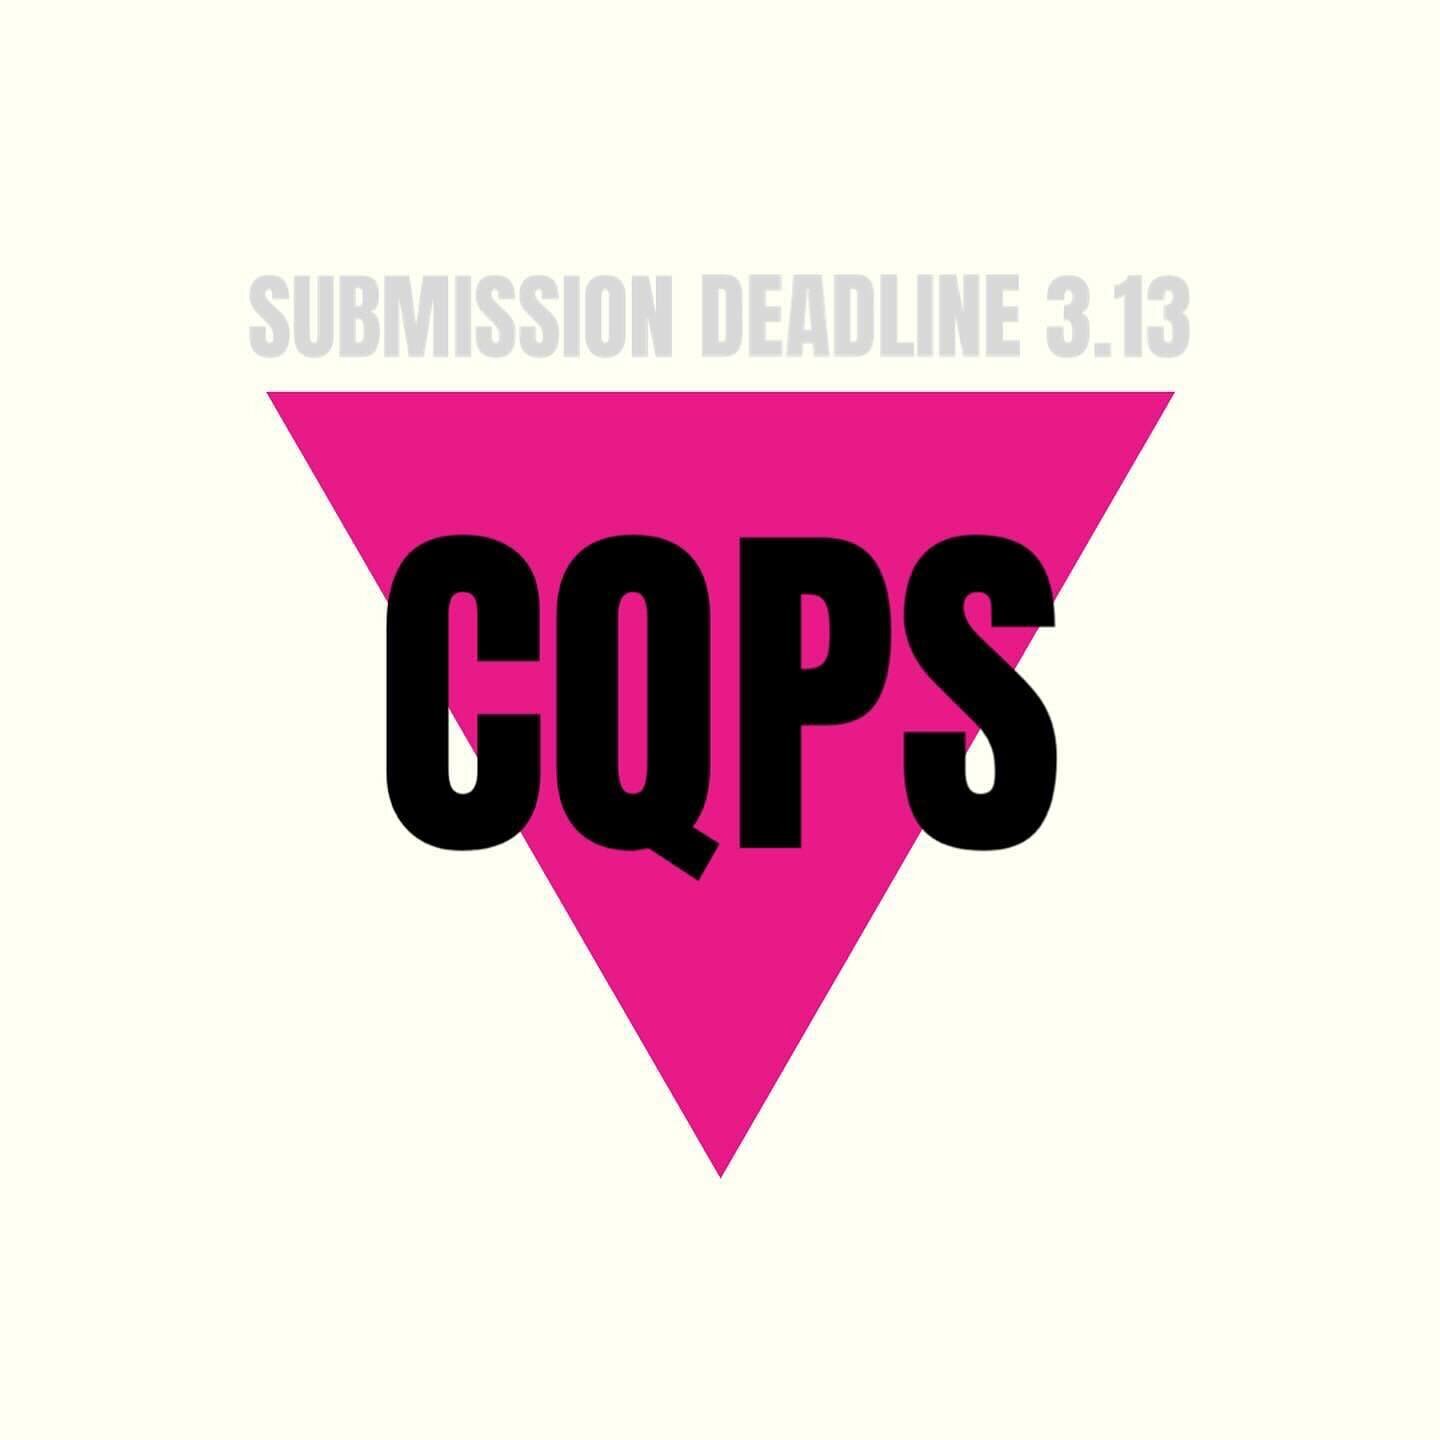 Exciting news for creatives on the prairie! We&rsquo;re opening the doors to &ldquo;CQPS&rdquo; a new collaborative pop-up space in the heart of Downtown Tulsa. AND we&rsquo;re now accepting submissions for two collaborative projects! We want to feat